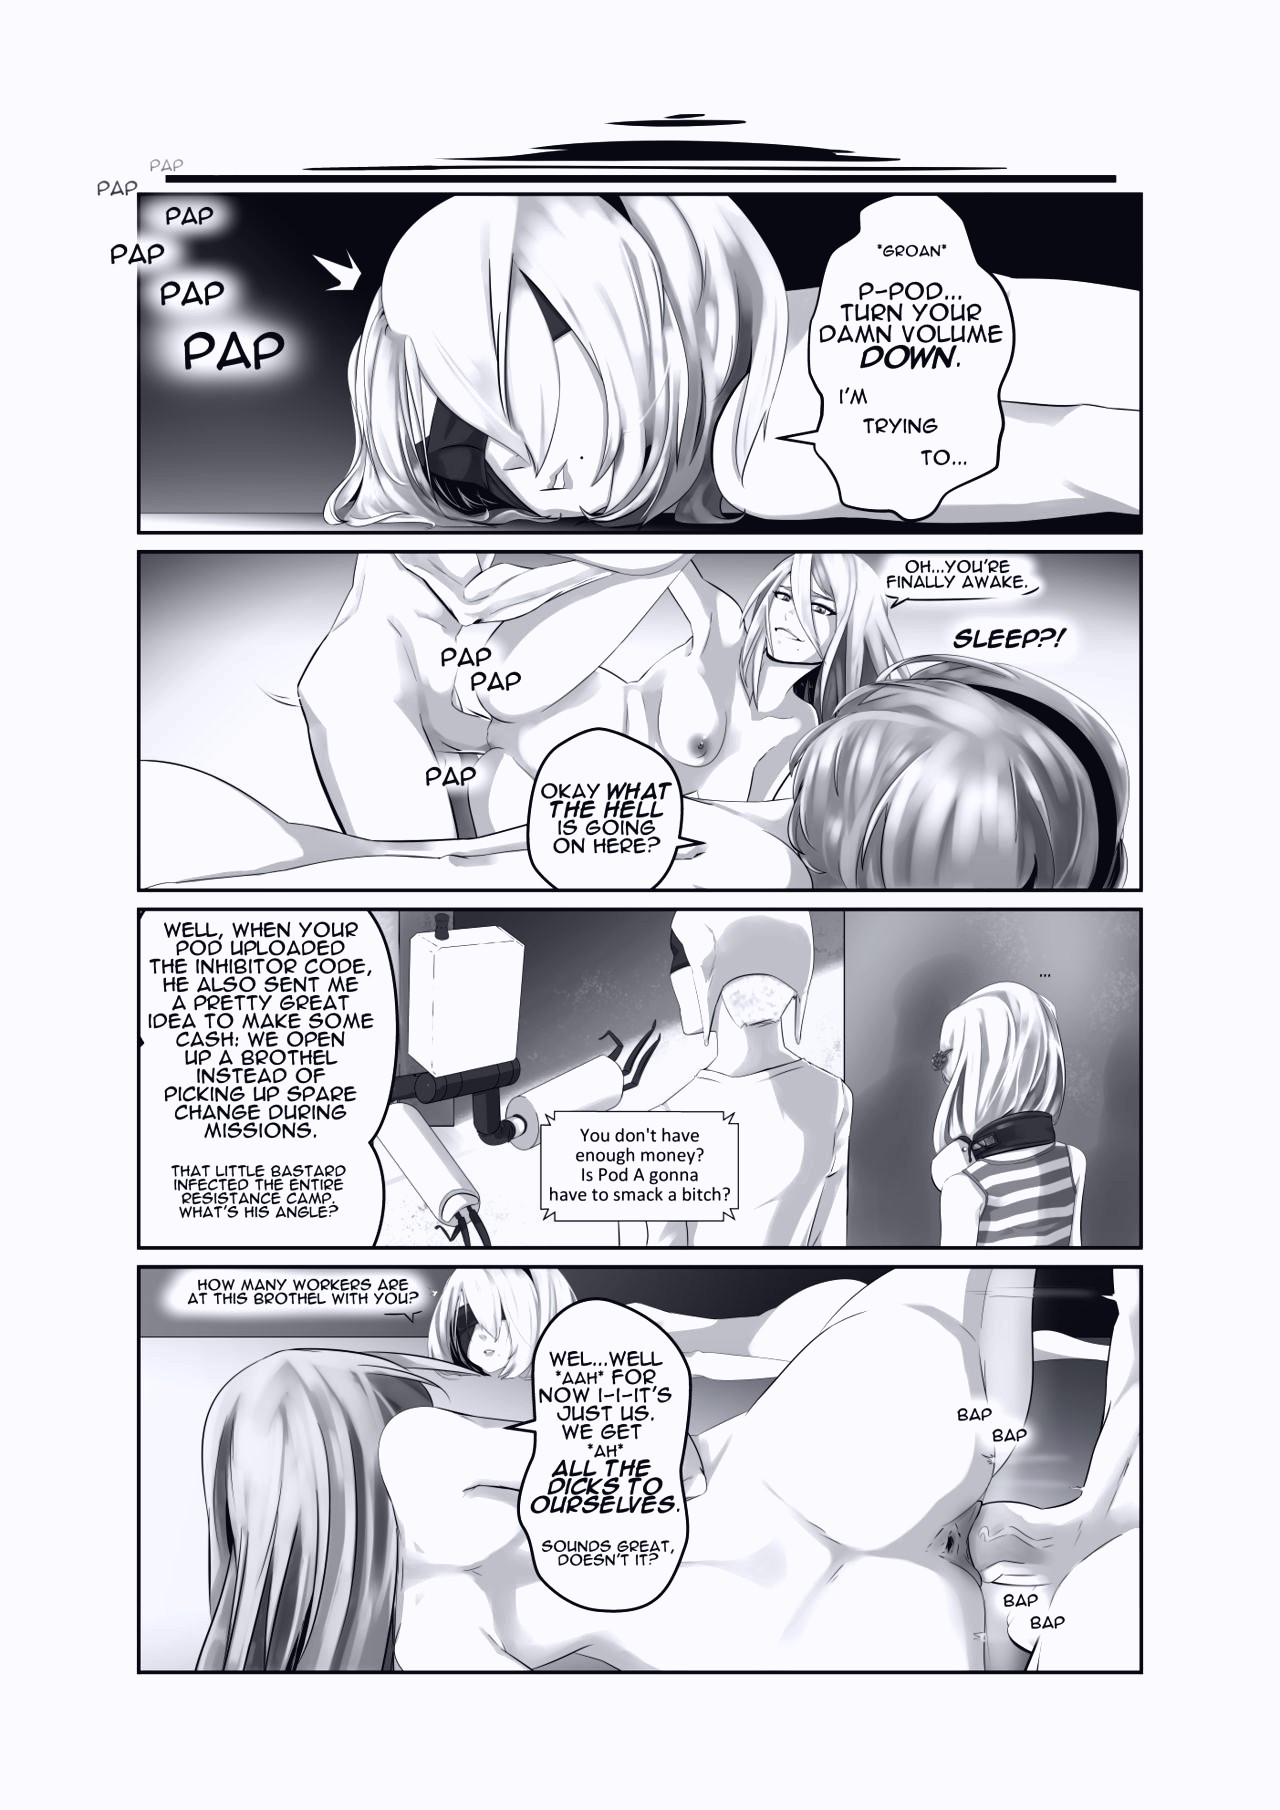 INFECTION porn comic page 012